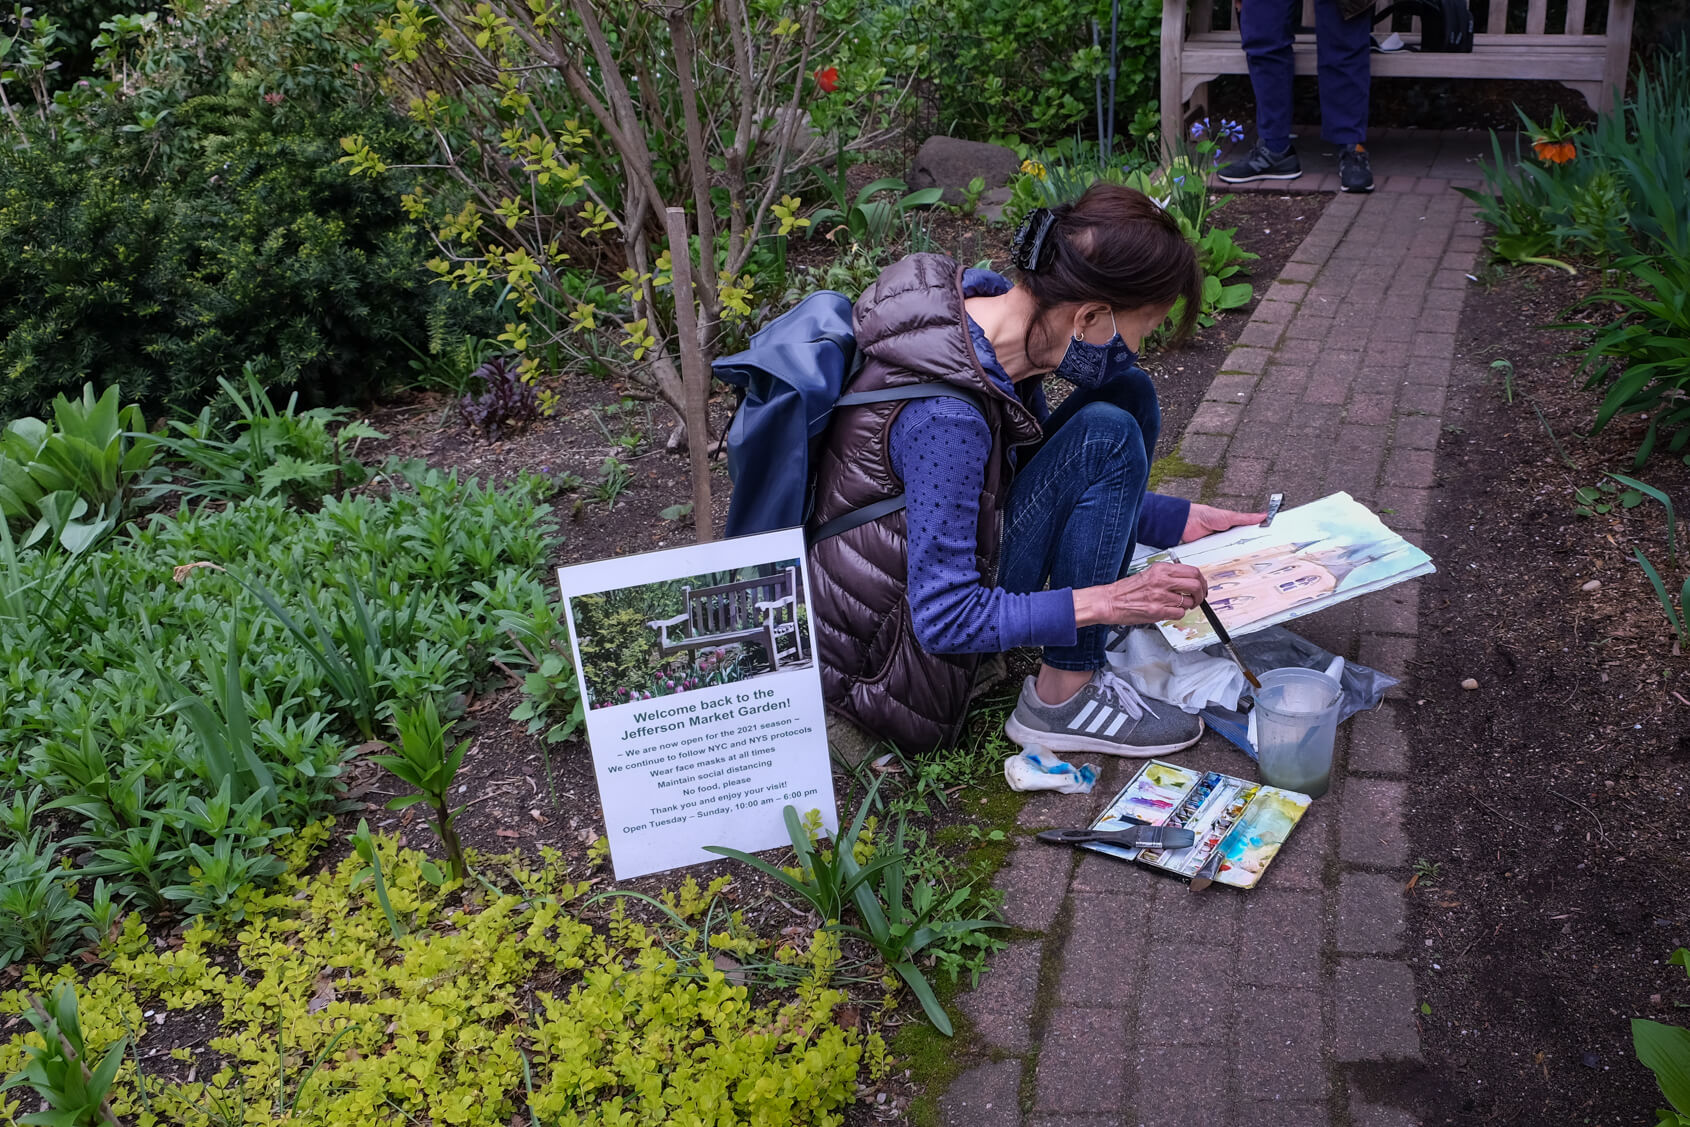 New York City parks beckon, emerging during the pandemic spring